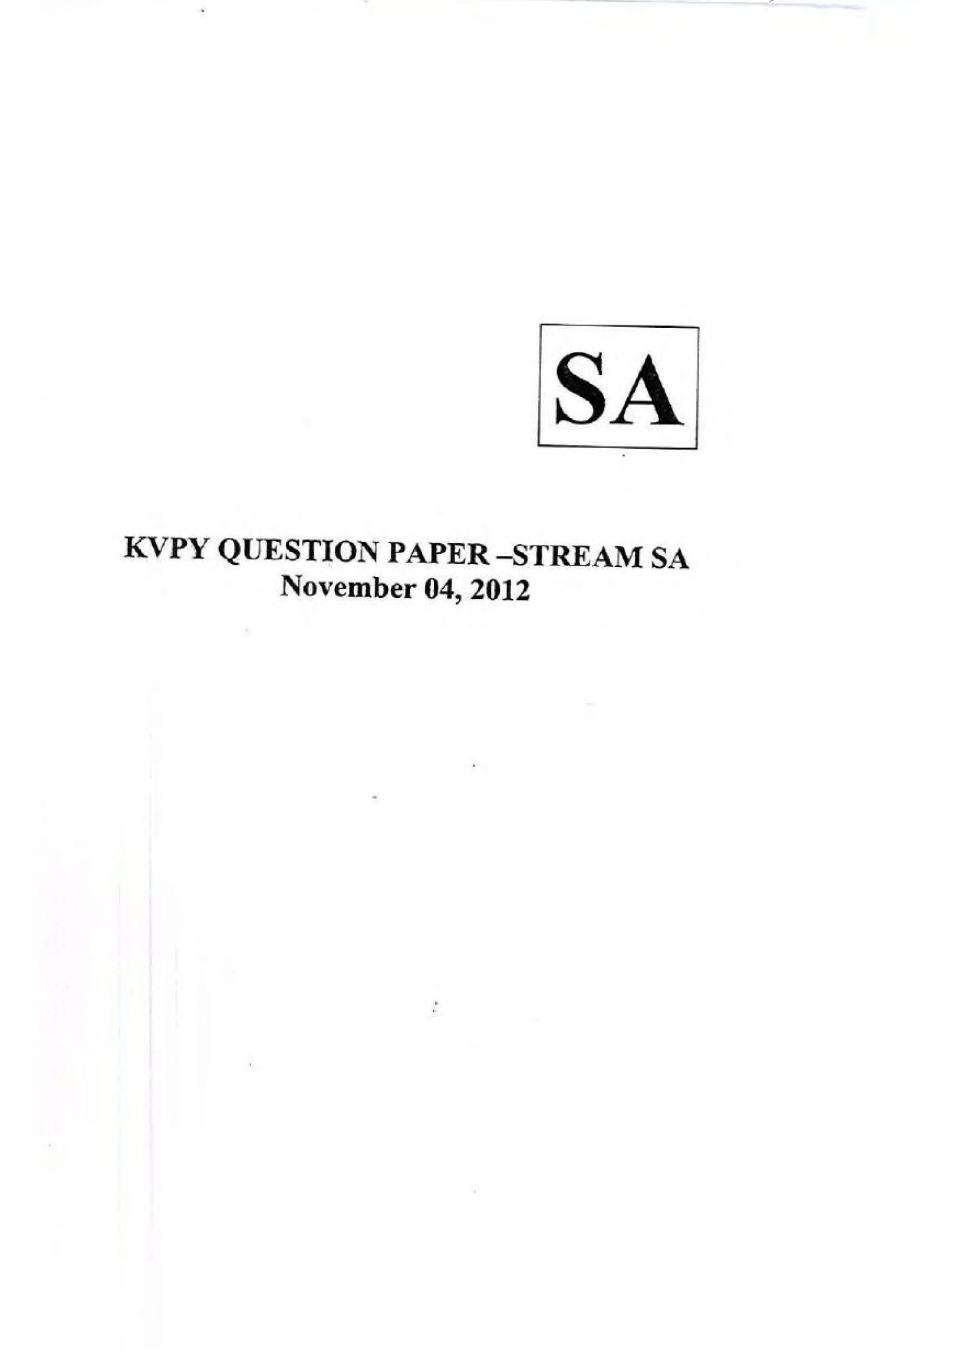 KVPY 2012 Question Paper with Answer Key for SA Stream - Page 1